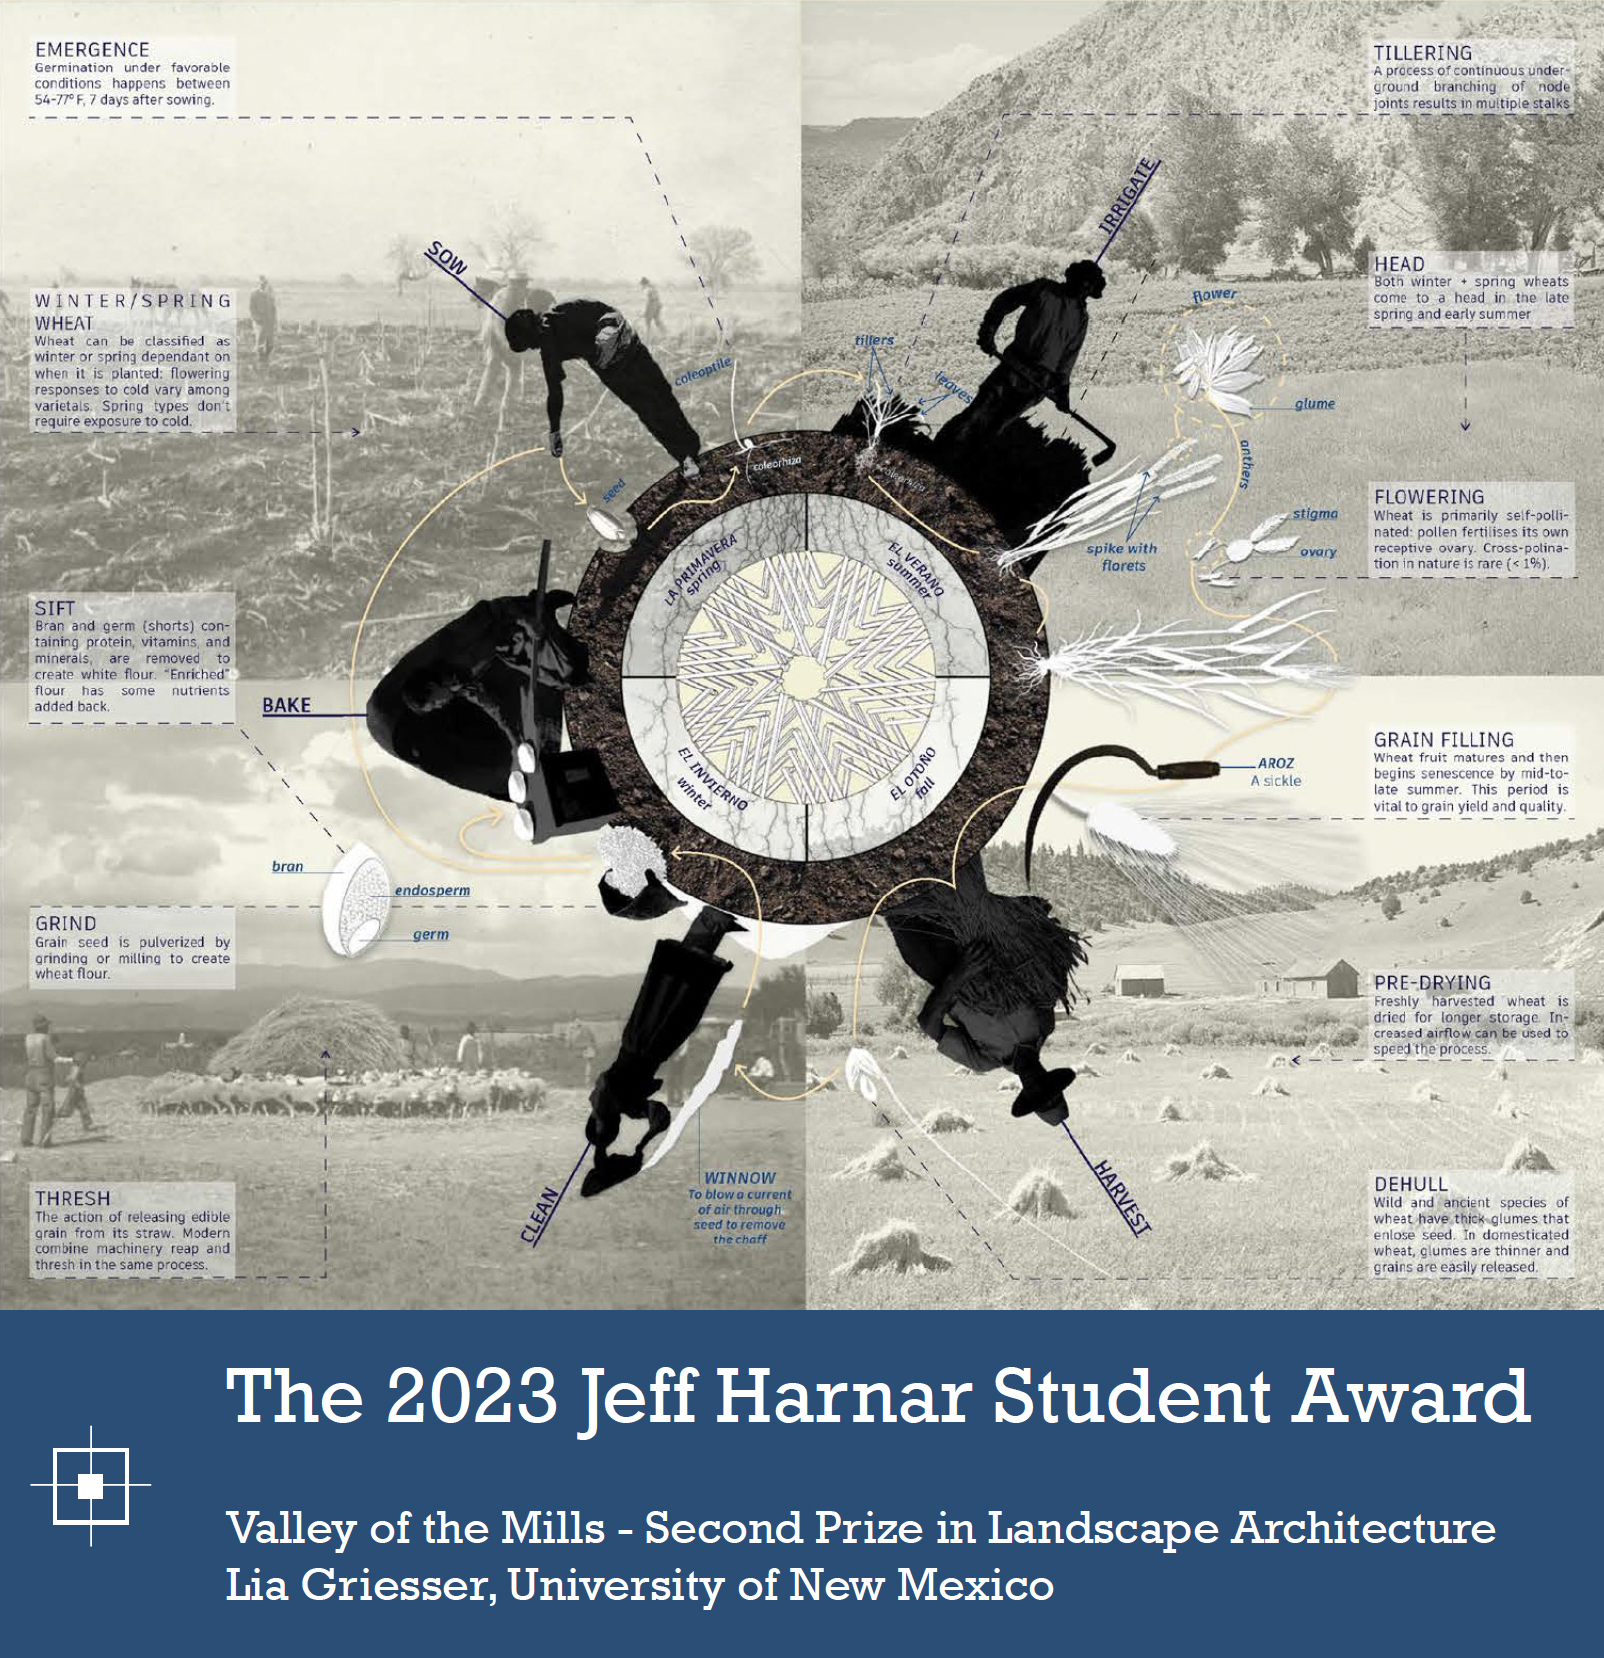 details of the 2023 jeff harnar student award for landscape architecture second place